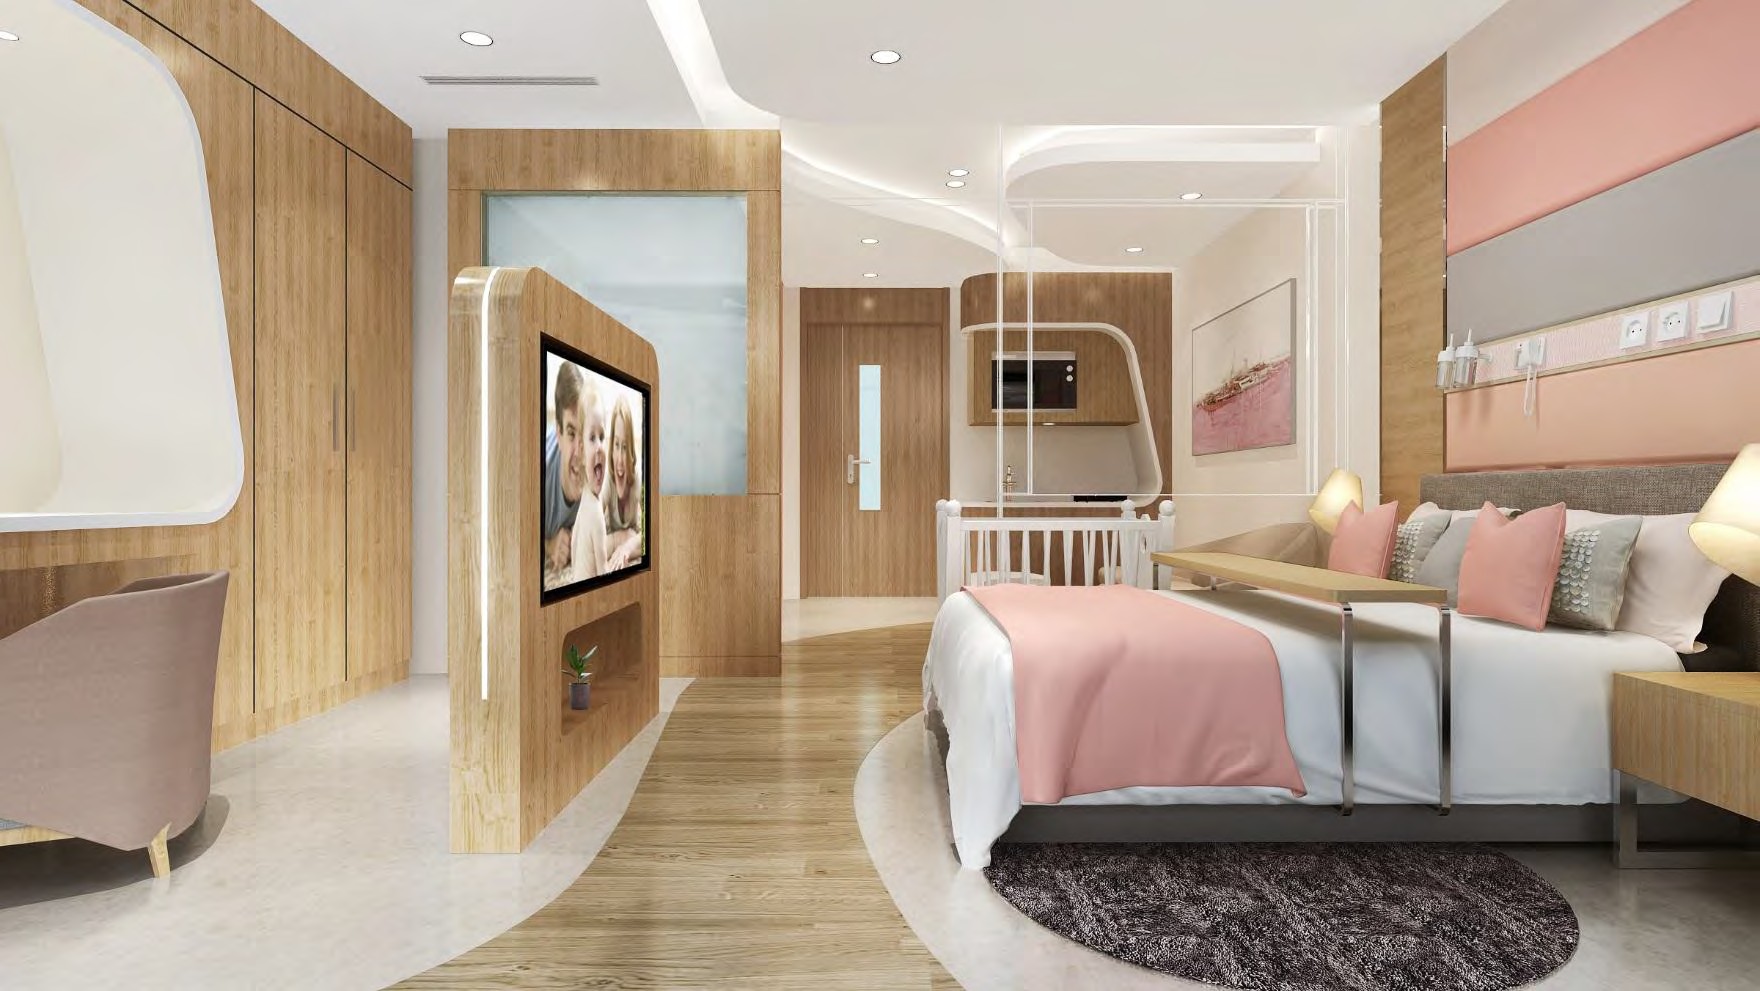 Room design of Huihe maternity and confinement center